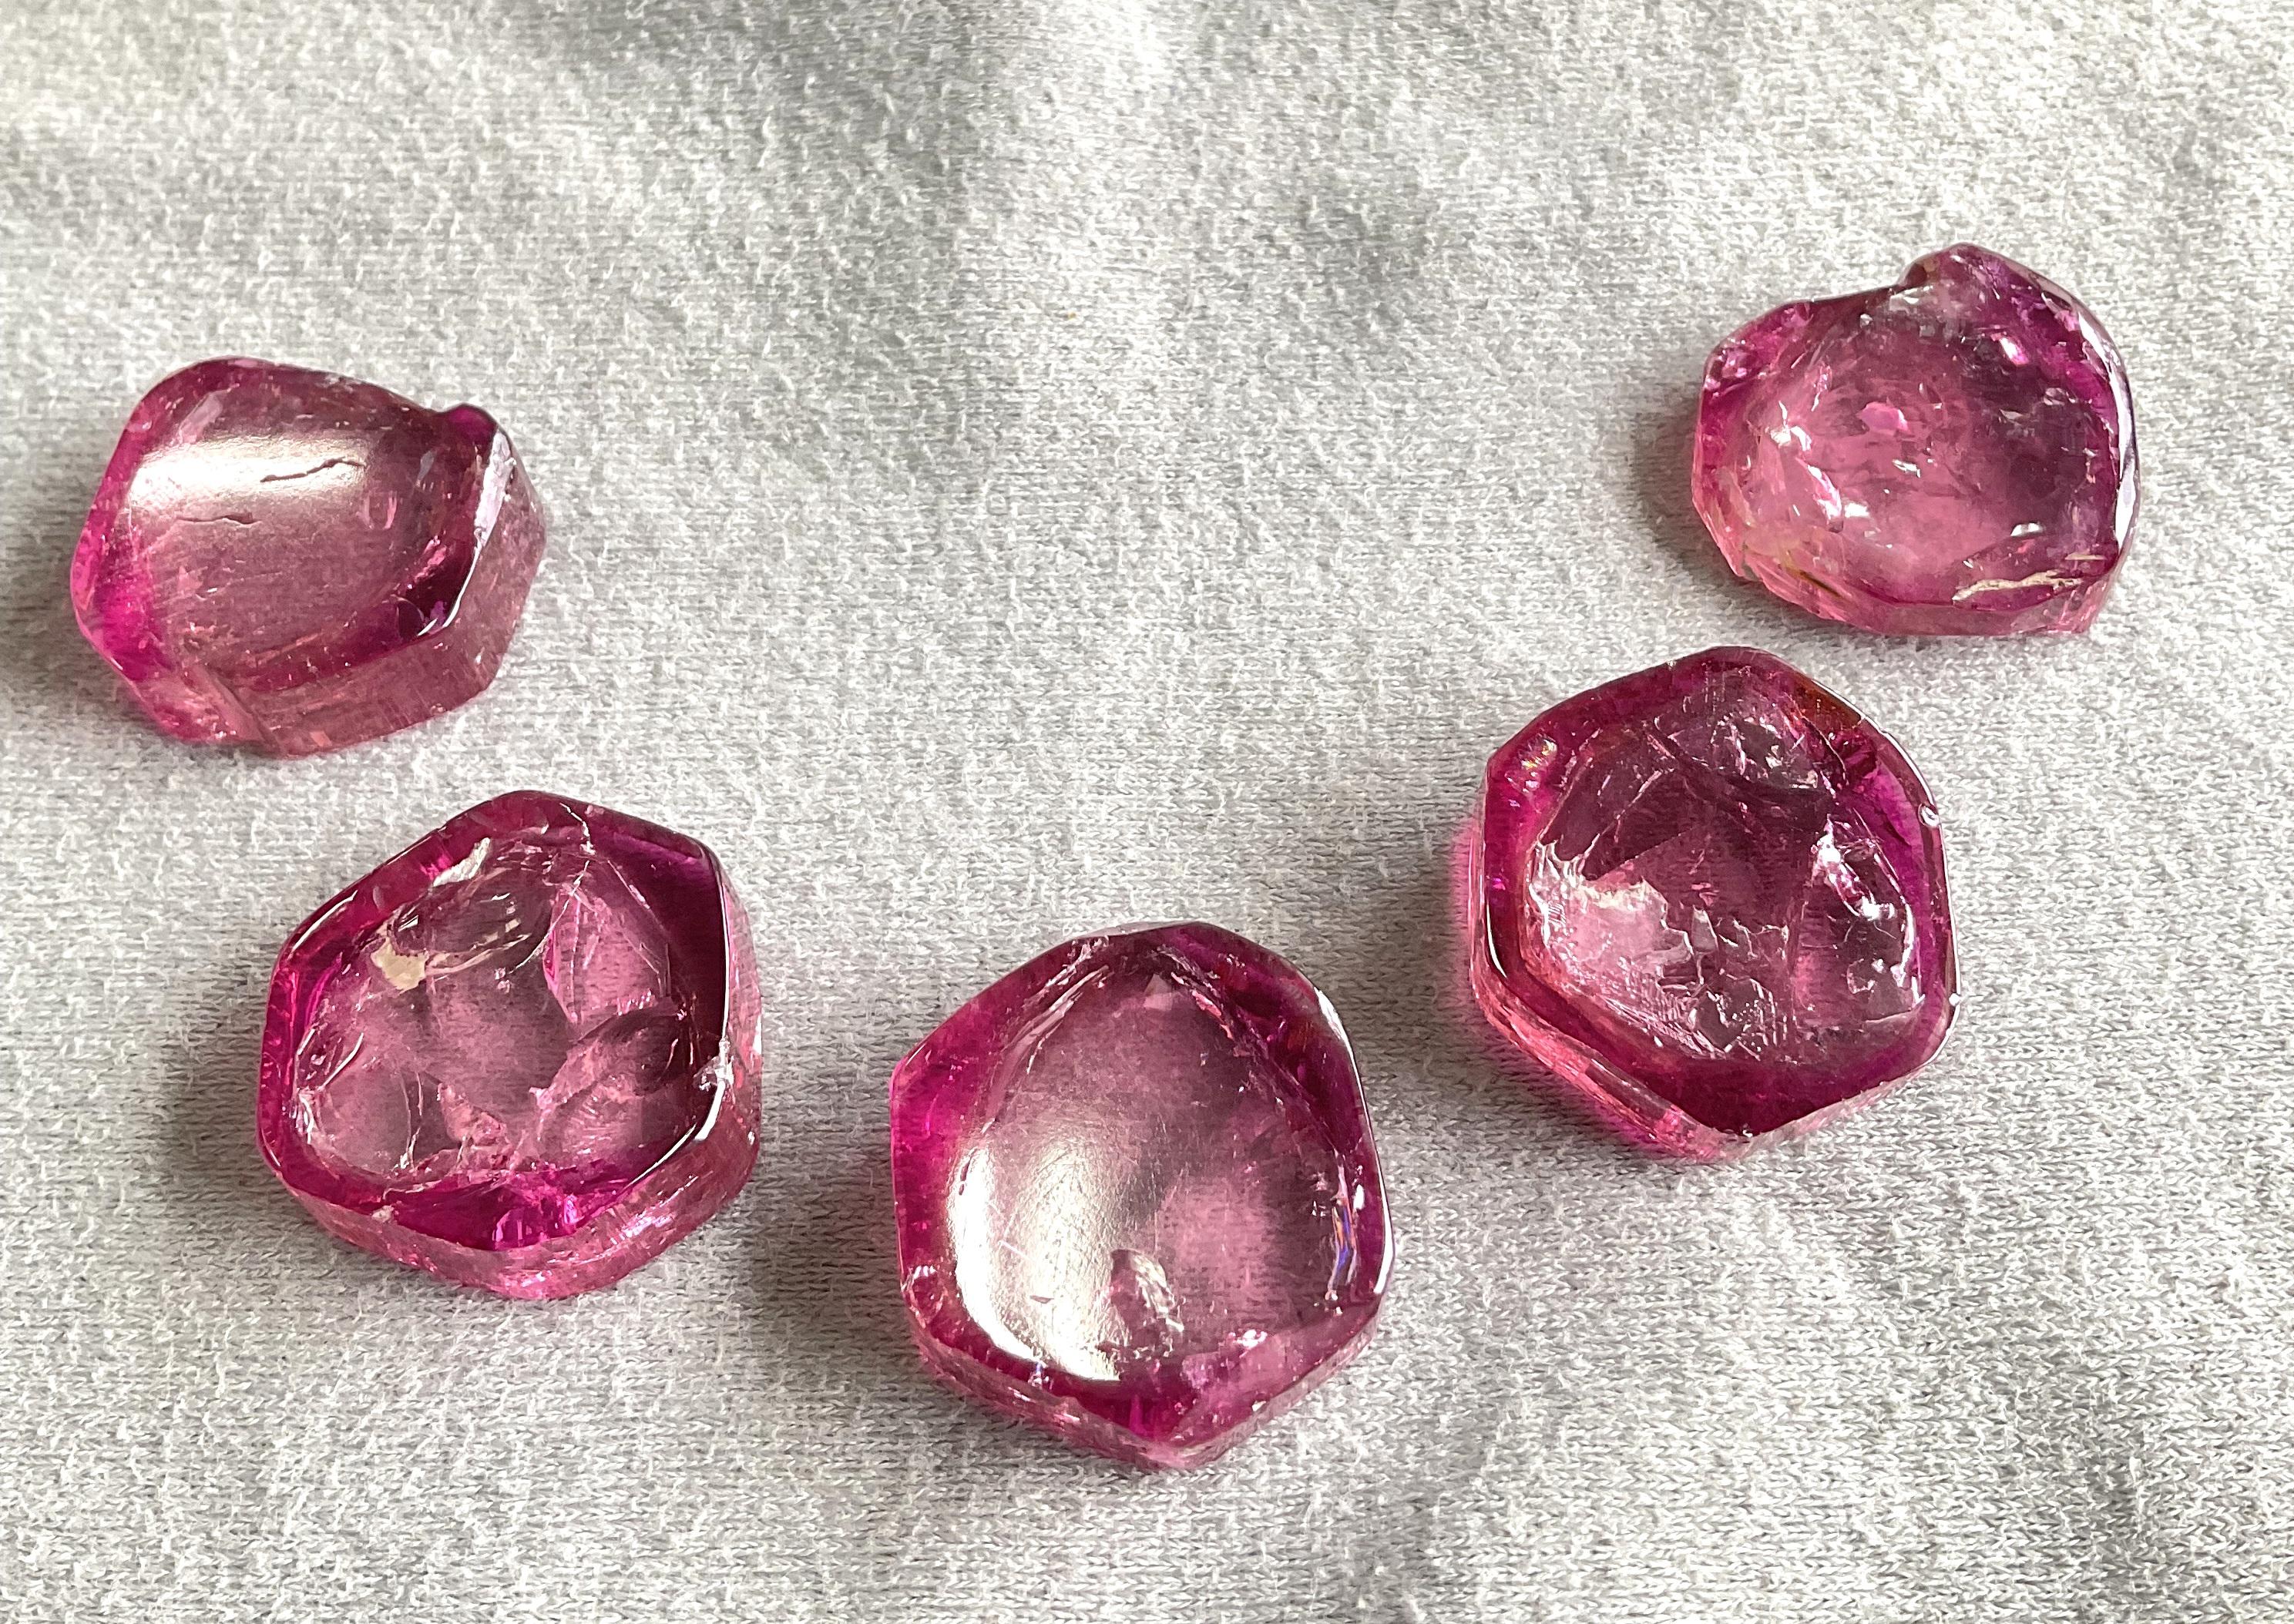 Tumbled 239.56 Carats Pink Color Tourmaline Natural Slices For Top Fine Jewelry Gemstone For Sale